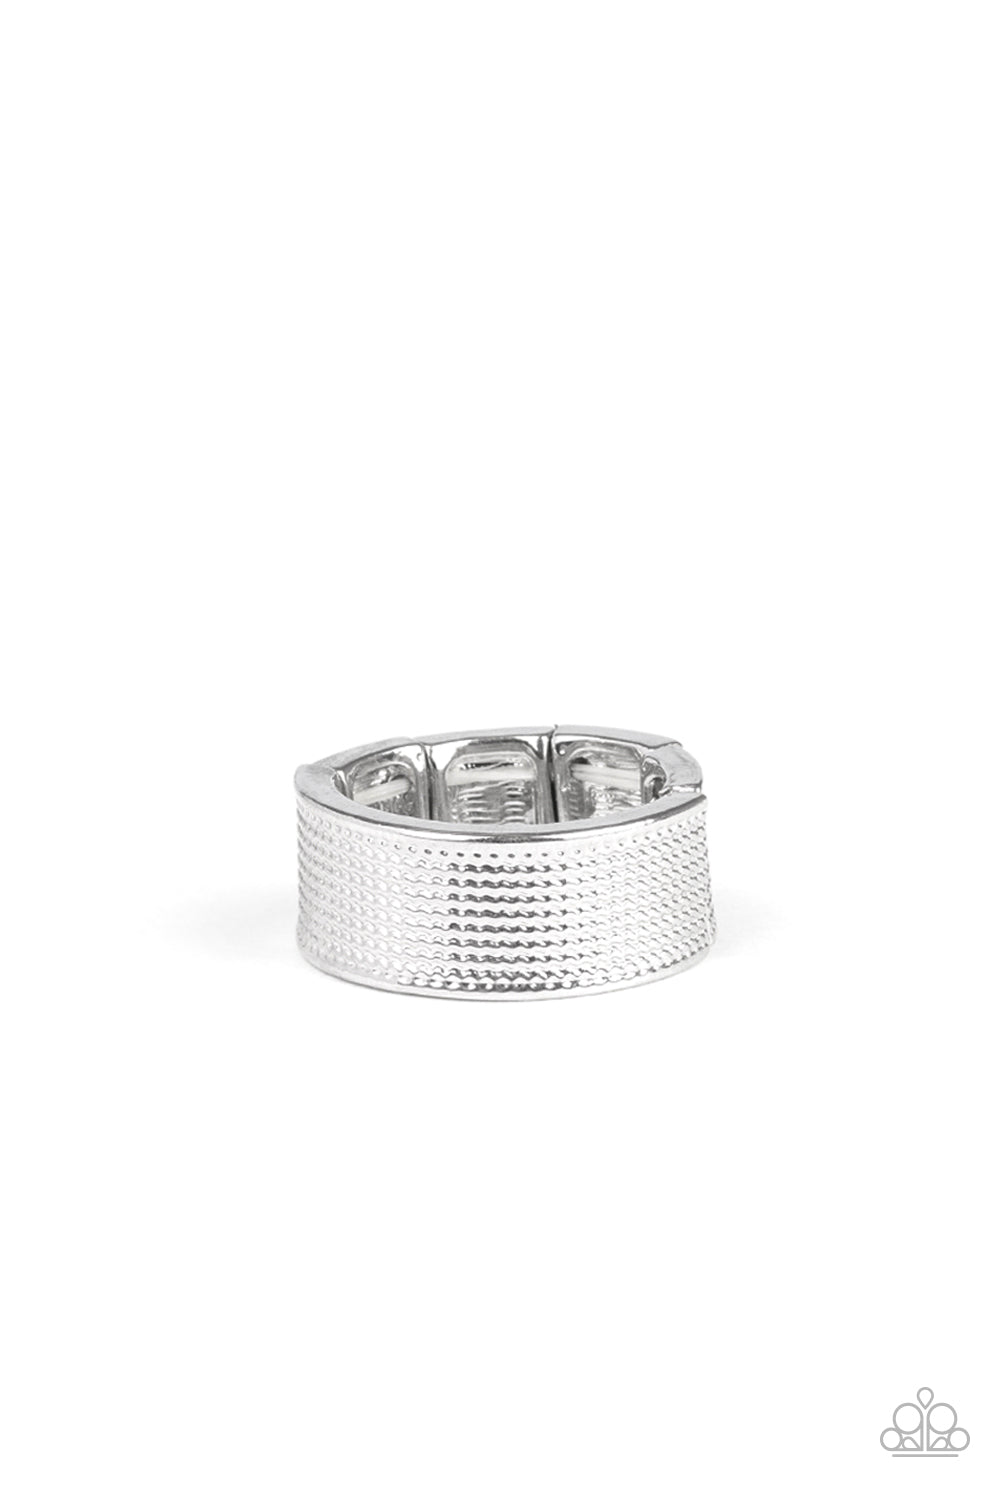 Uppercut Silver Urban Ring - Paparazzi Accessories  Hammered in row after row of dotted texture, a shiny silver band arcs across the finger for an edgy industrial look. Features a stretchy band for a flexible fit.  All Paparazzi Accessories are lead free and nickel free!  Sold as one individual ring.